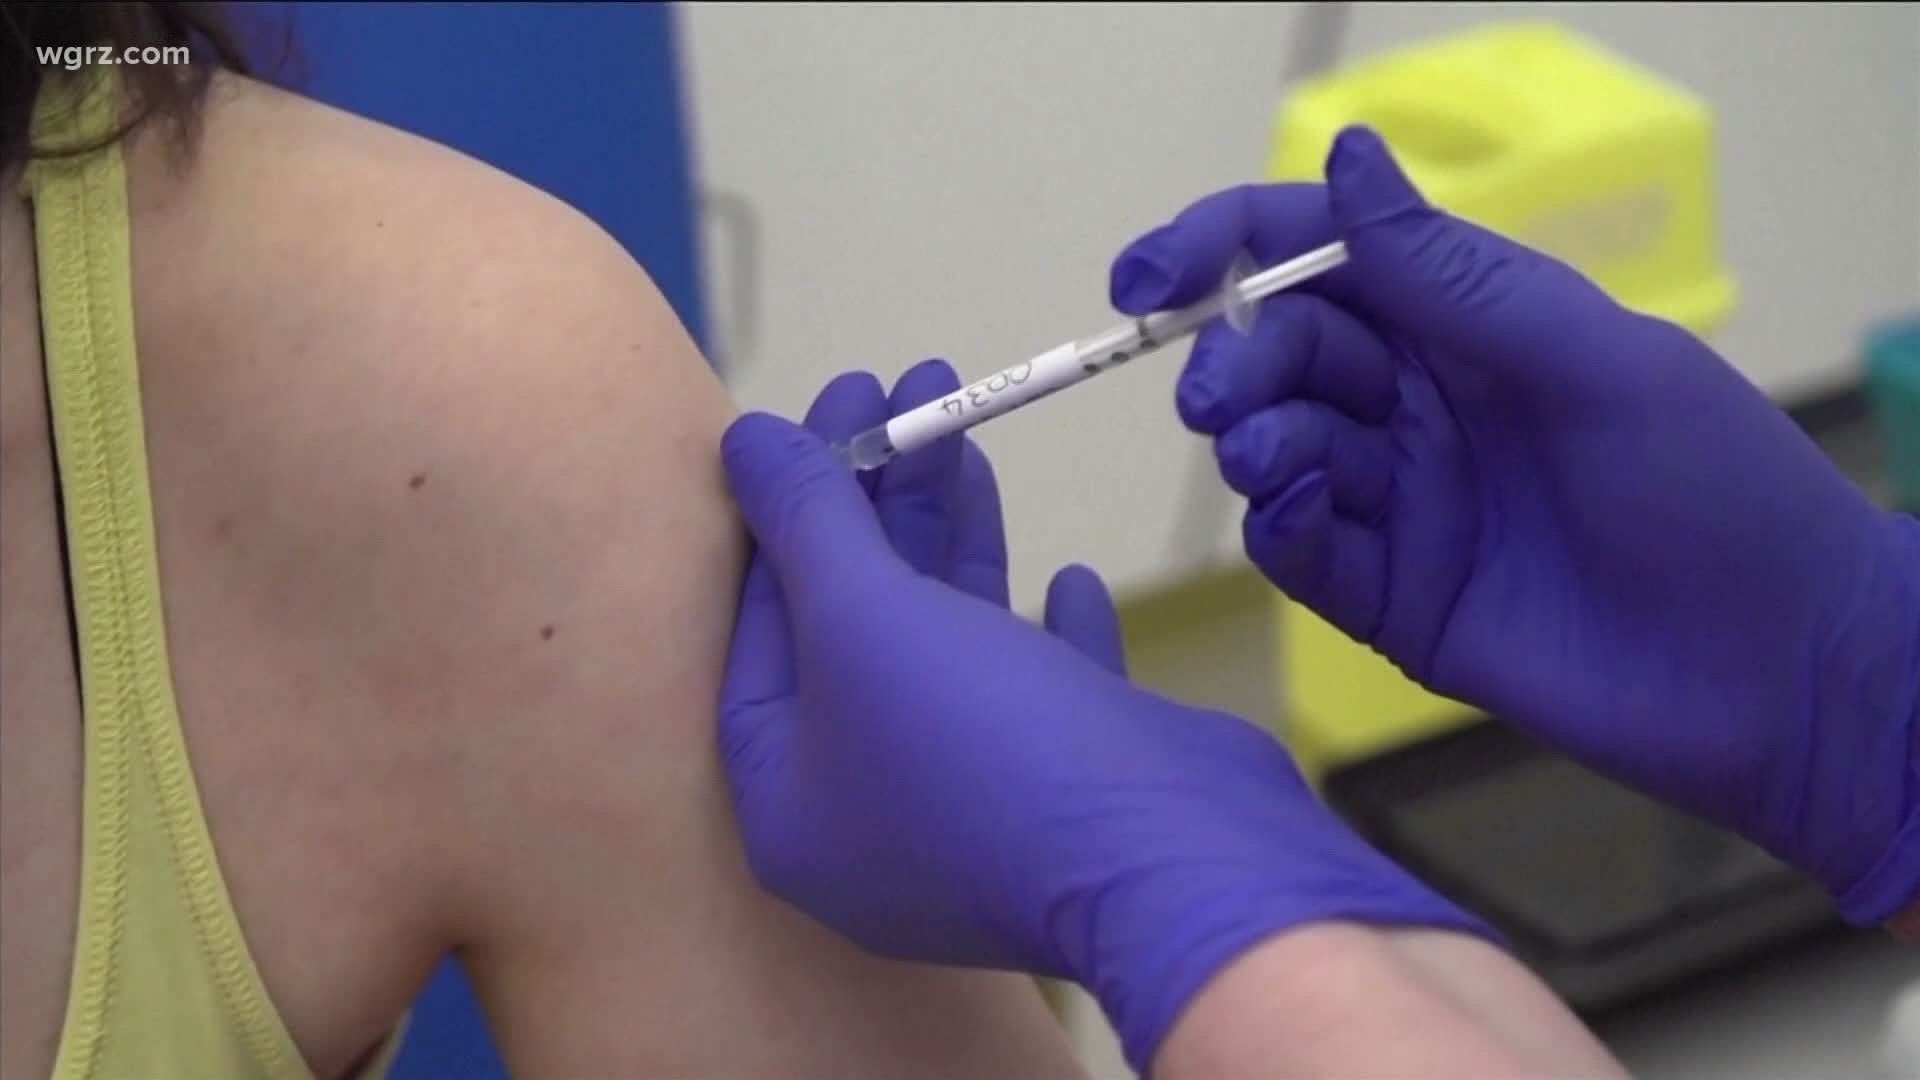 A similar mandate in Massachusetts will require students to get a current flu shot by December 31.